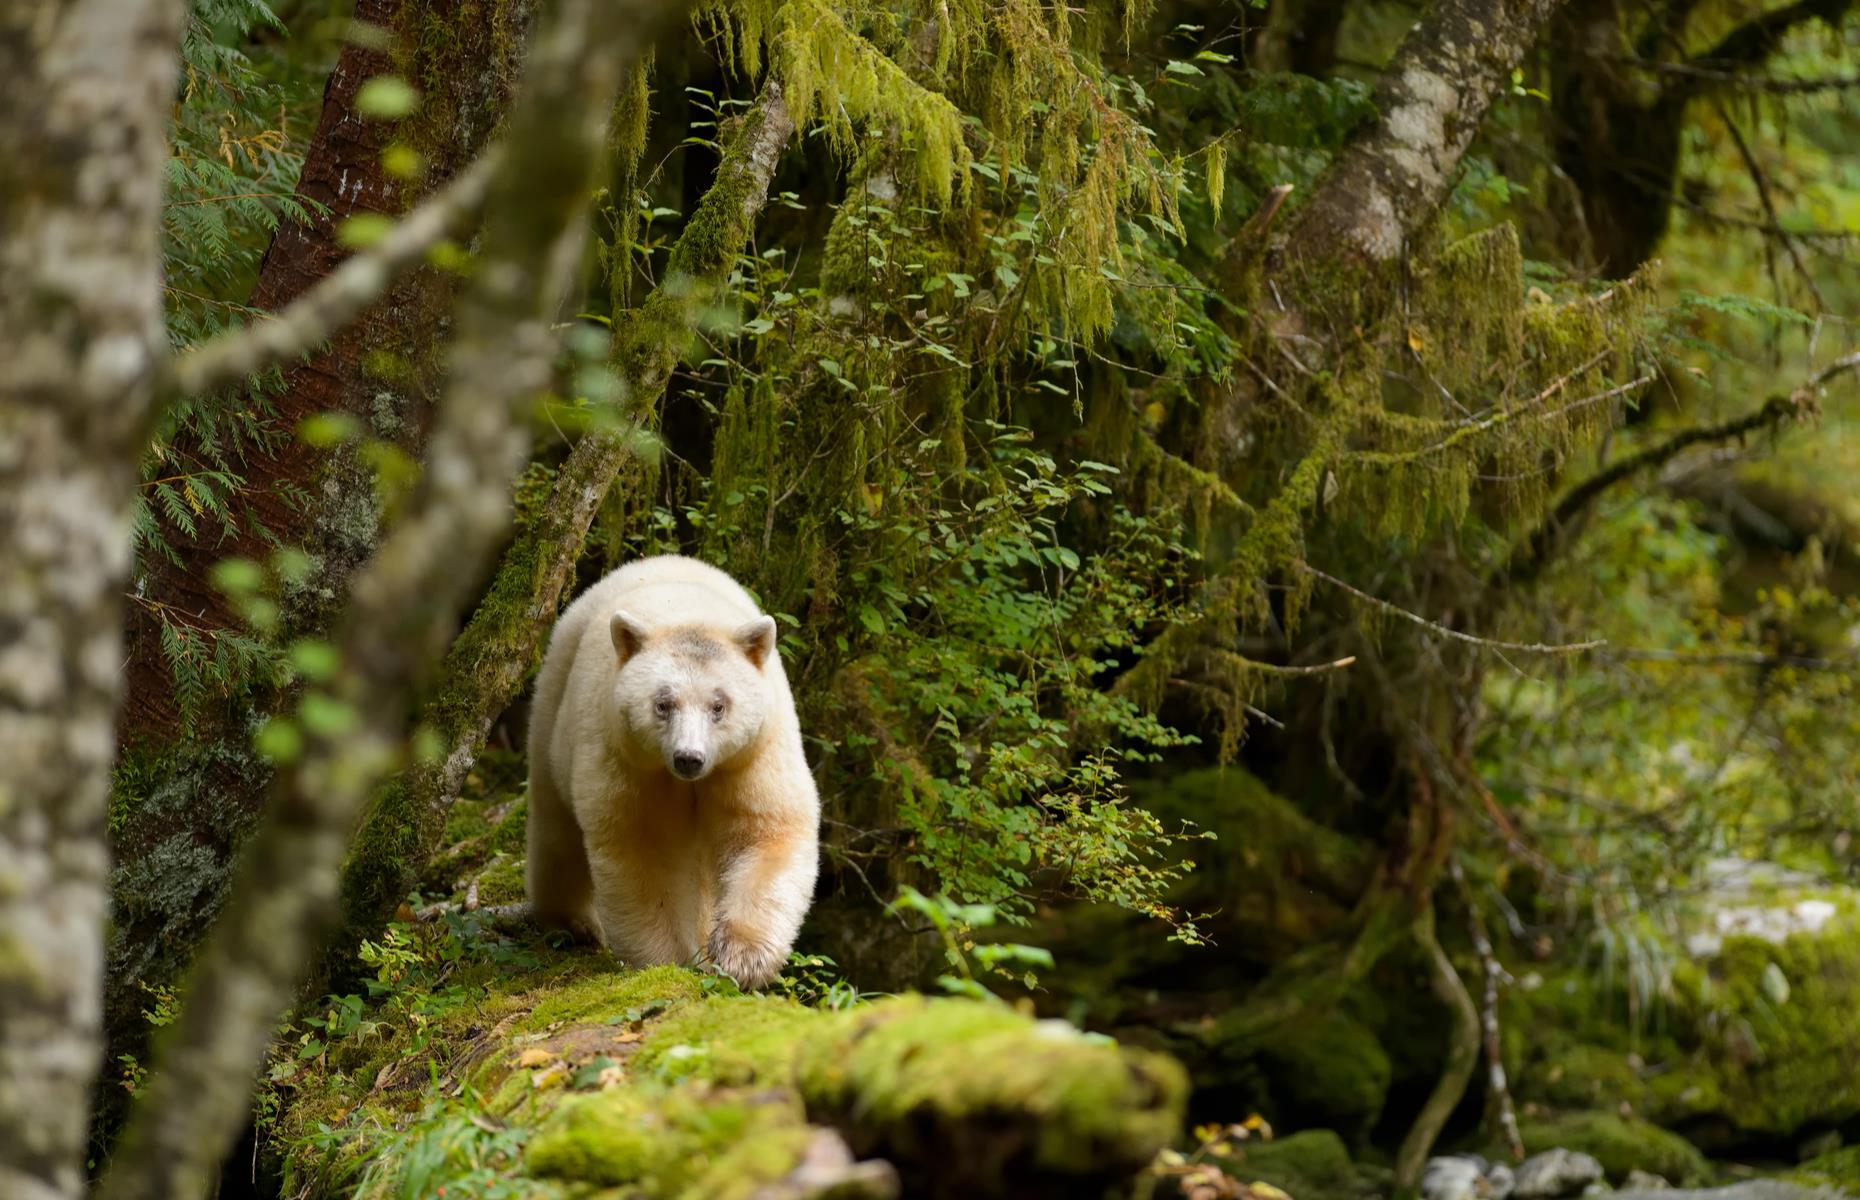 <p>Pause for breath in British Columbia’s Great Bear Rainforest and you may hear the screech of a bald eagle, the howl of the rare coastal wolf or the sound of branches cracking as a ghostly spirit bear makes its way through the forest. These all-white animals – actually a mutated sub-species of black bear – are so rare that Indigenous communities believe they have supernatural powers.  </p>  <p><a href="https://www.loveexploring.com/galleries/169844/the-staggering-beauty-of-canadas-national-park-reserves?page=1"><strong>The staggering beauty of Canada's national park reserves</strong></a></p>